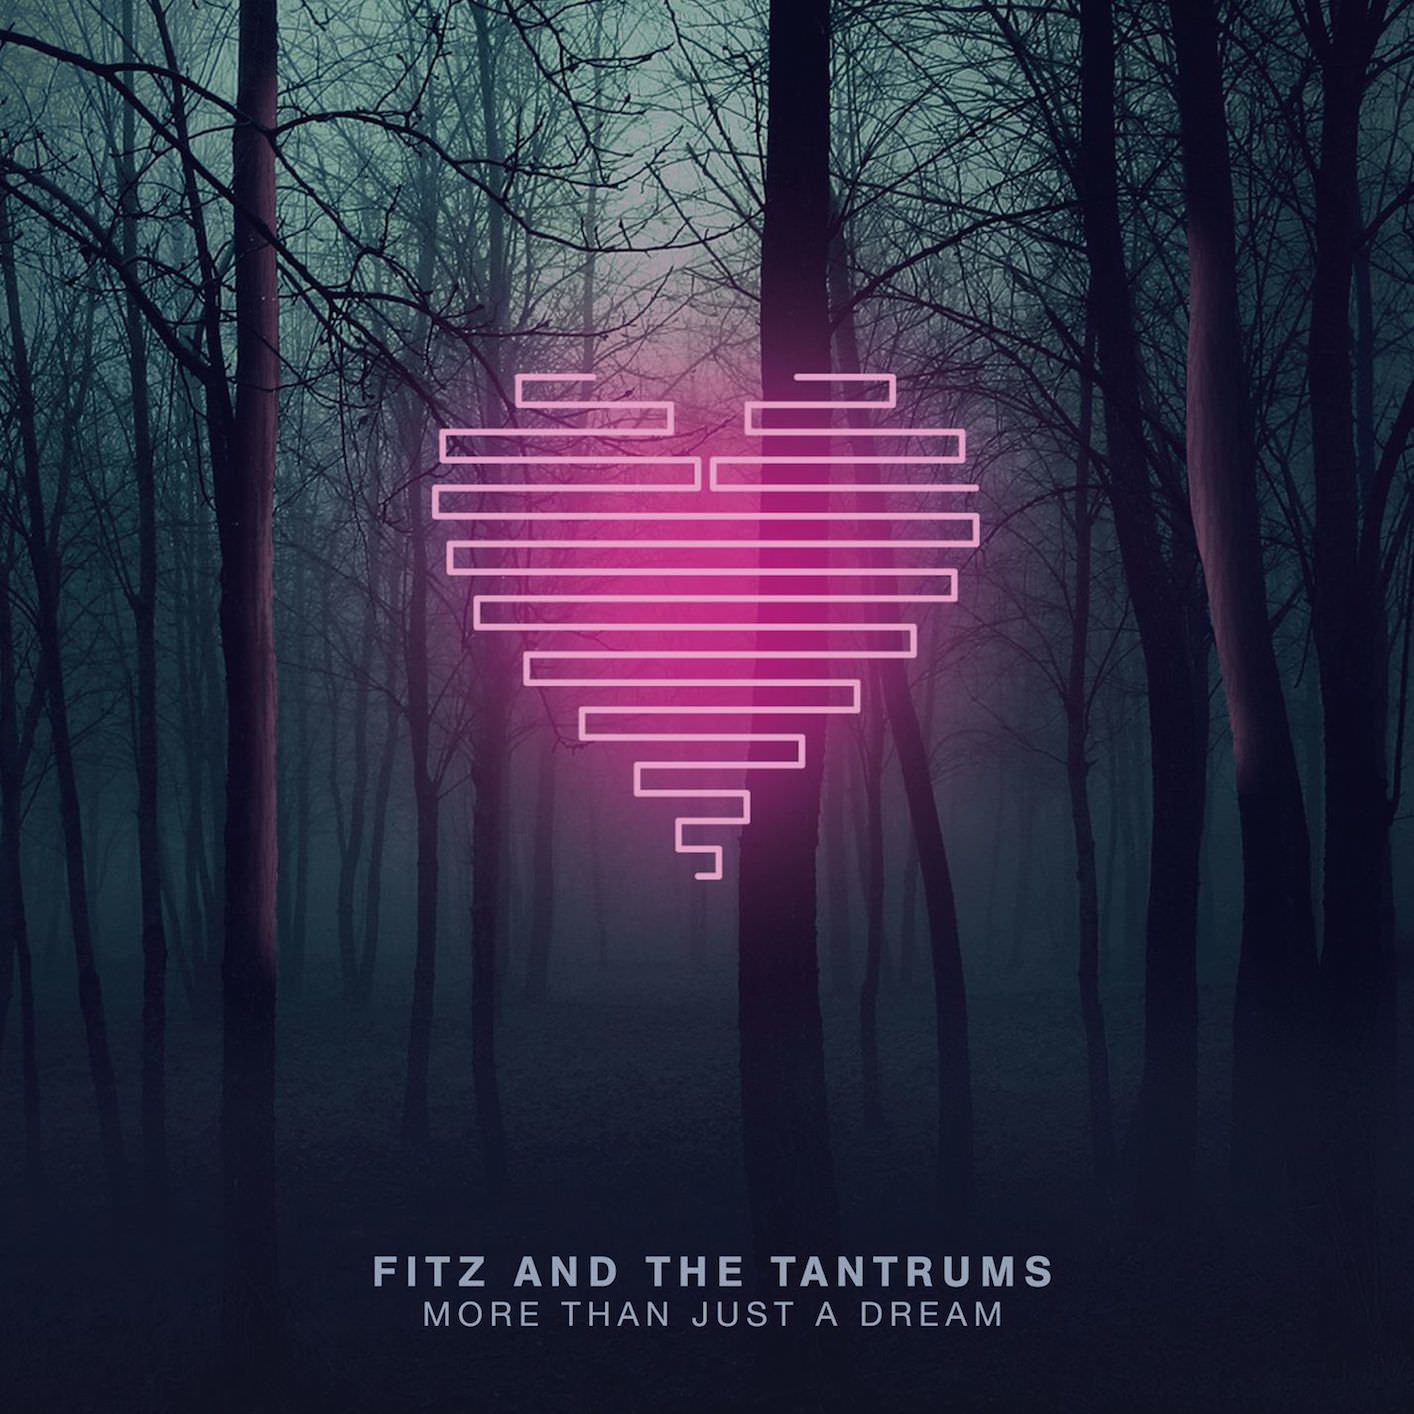 Fitz & The Tantrums - More Than Just A Dream {Deluxe Edition} (2013) [Qobuz FLAC 24bit/44,1kHz]